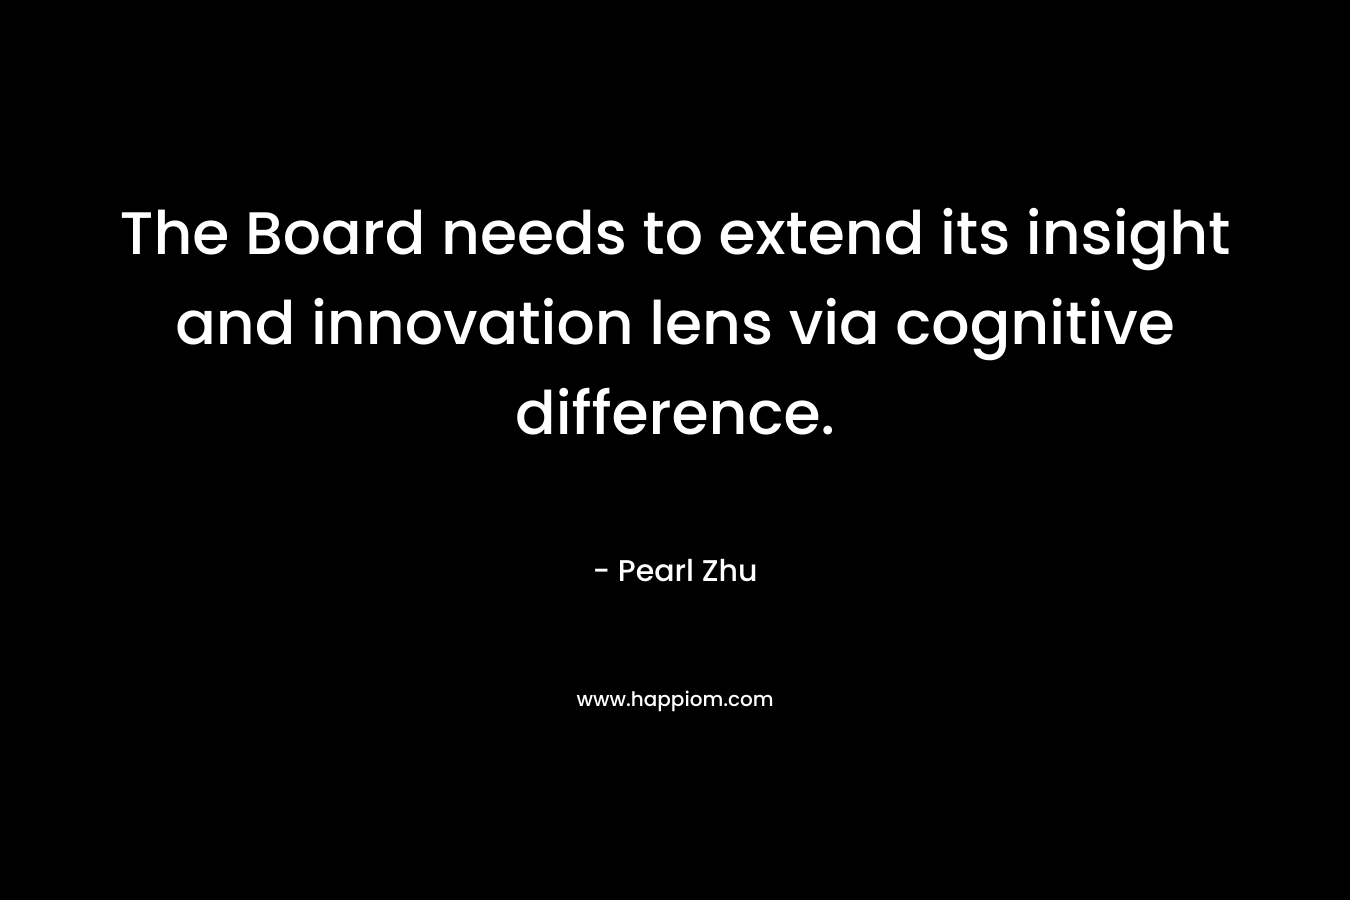 The Board needs to extend its insight and innovation lens via cognitive difference.